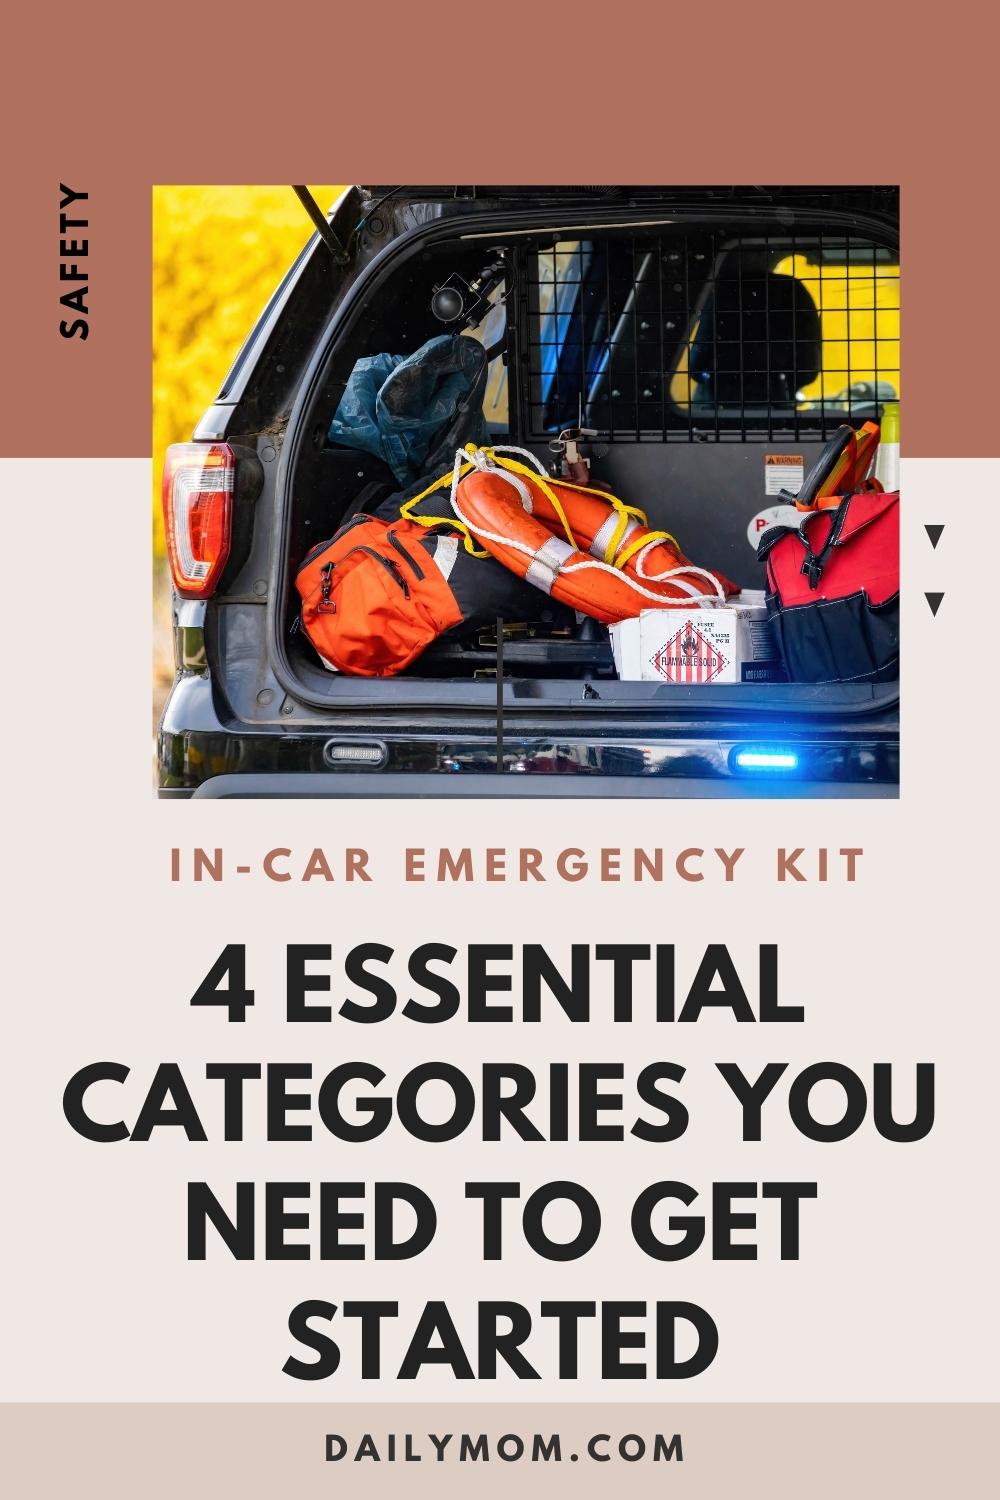 In-Car Emergency Kit: 4 Essential Categories You Need To Get Started